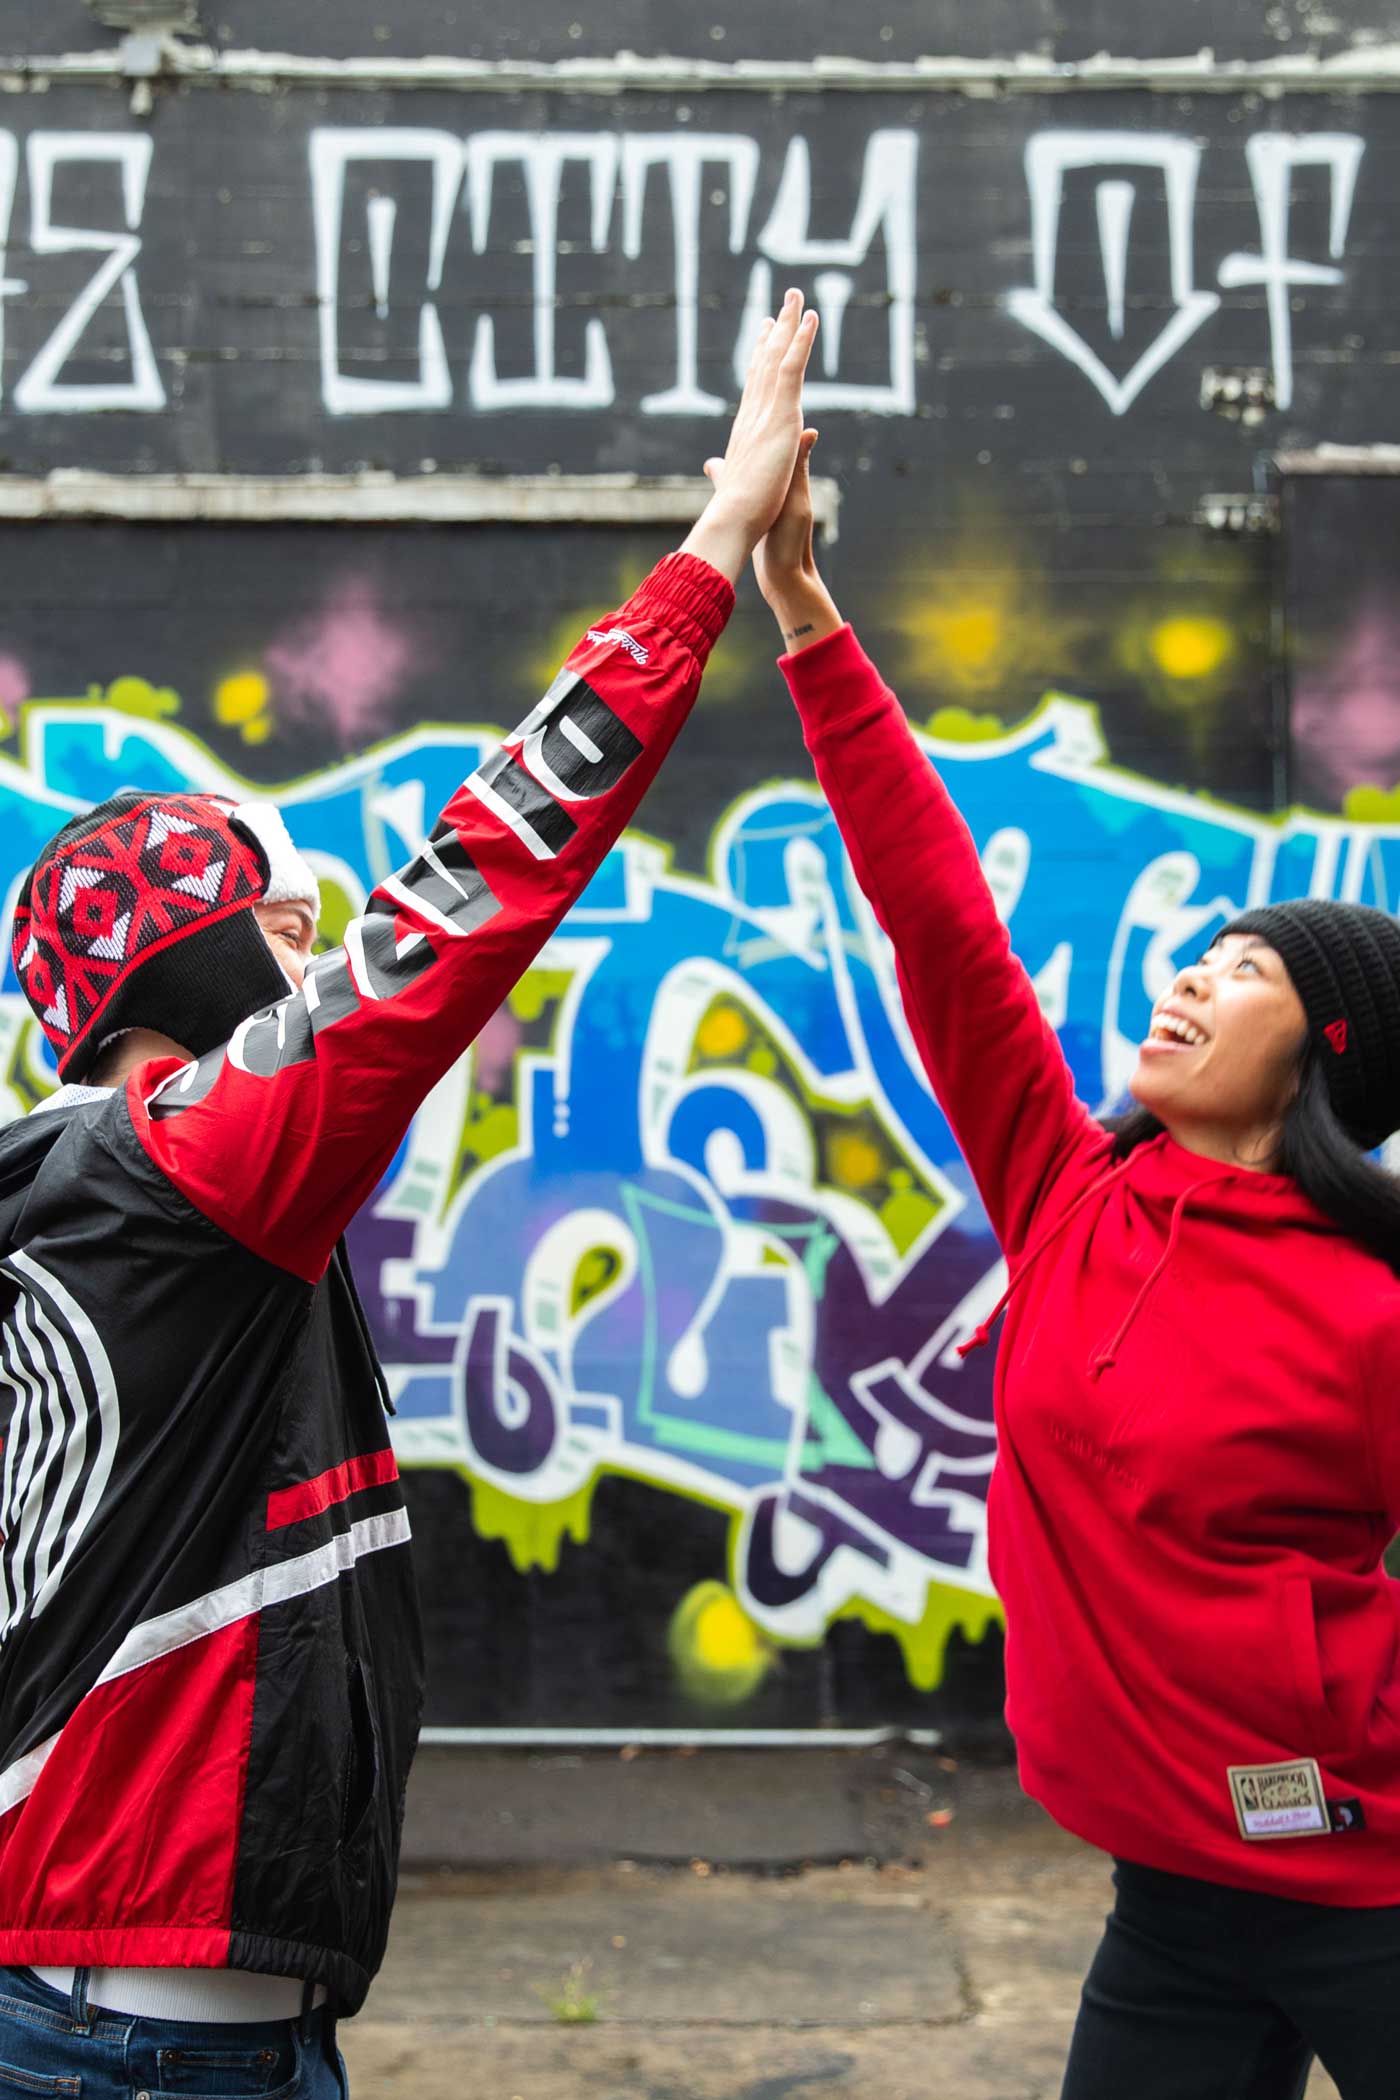 Mitchell & Ness bringing throwback jersey pop-up to Public Square